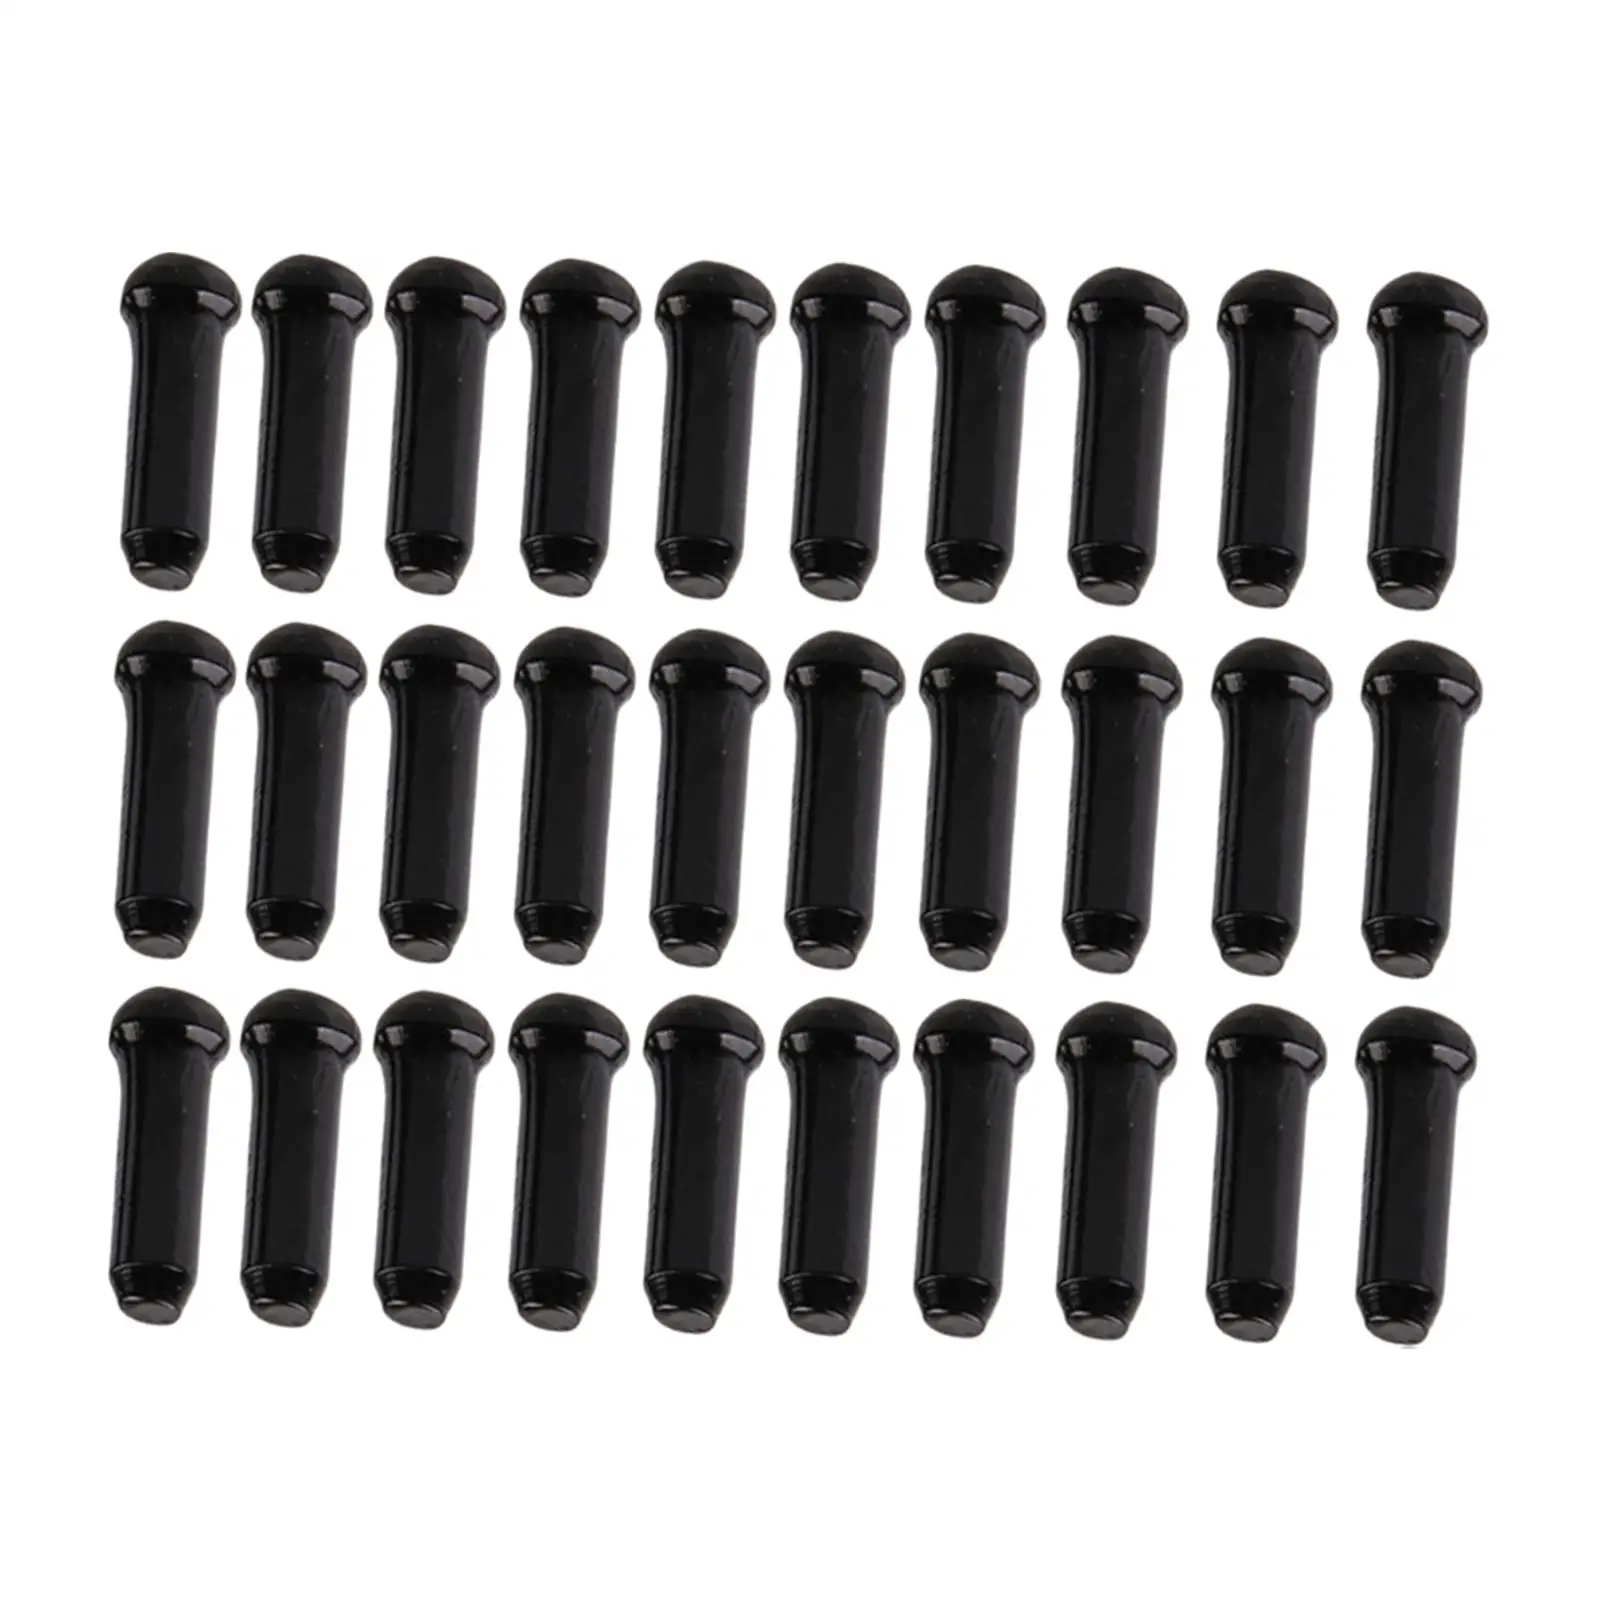 30 Pieces Bike Cable End Caps, Bicycle Brake Cable End Caps, Bike Inner Wire Gear, Bike Cable Caps for Mountain Road Bike